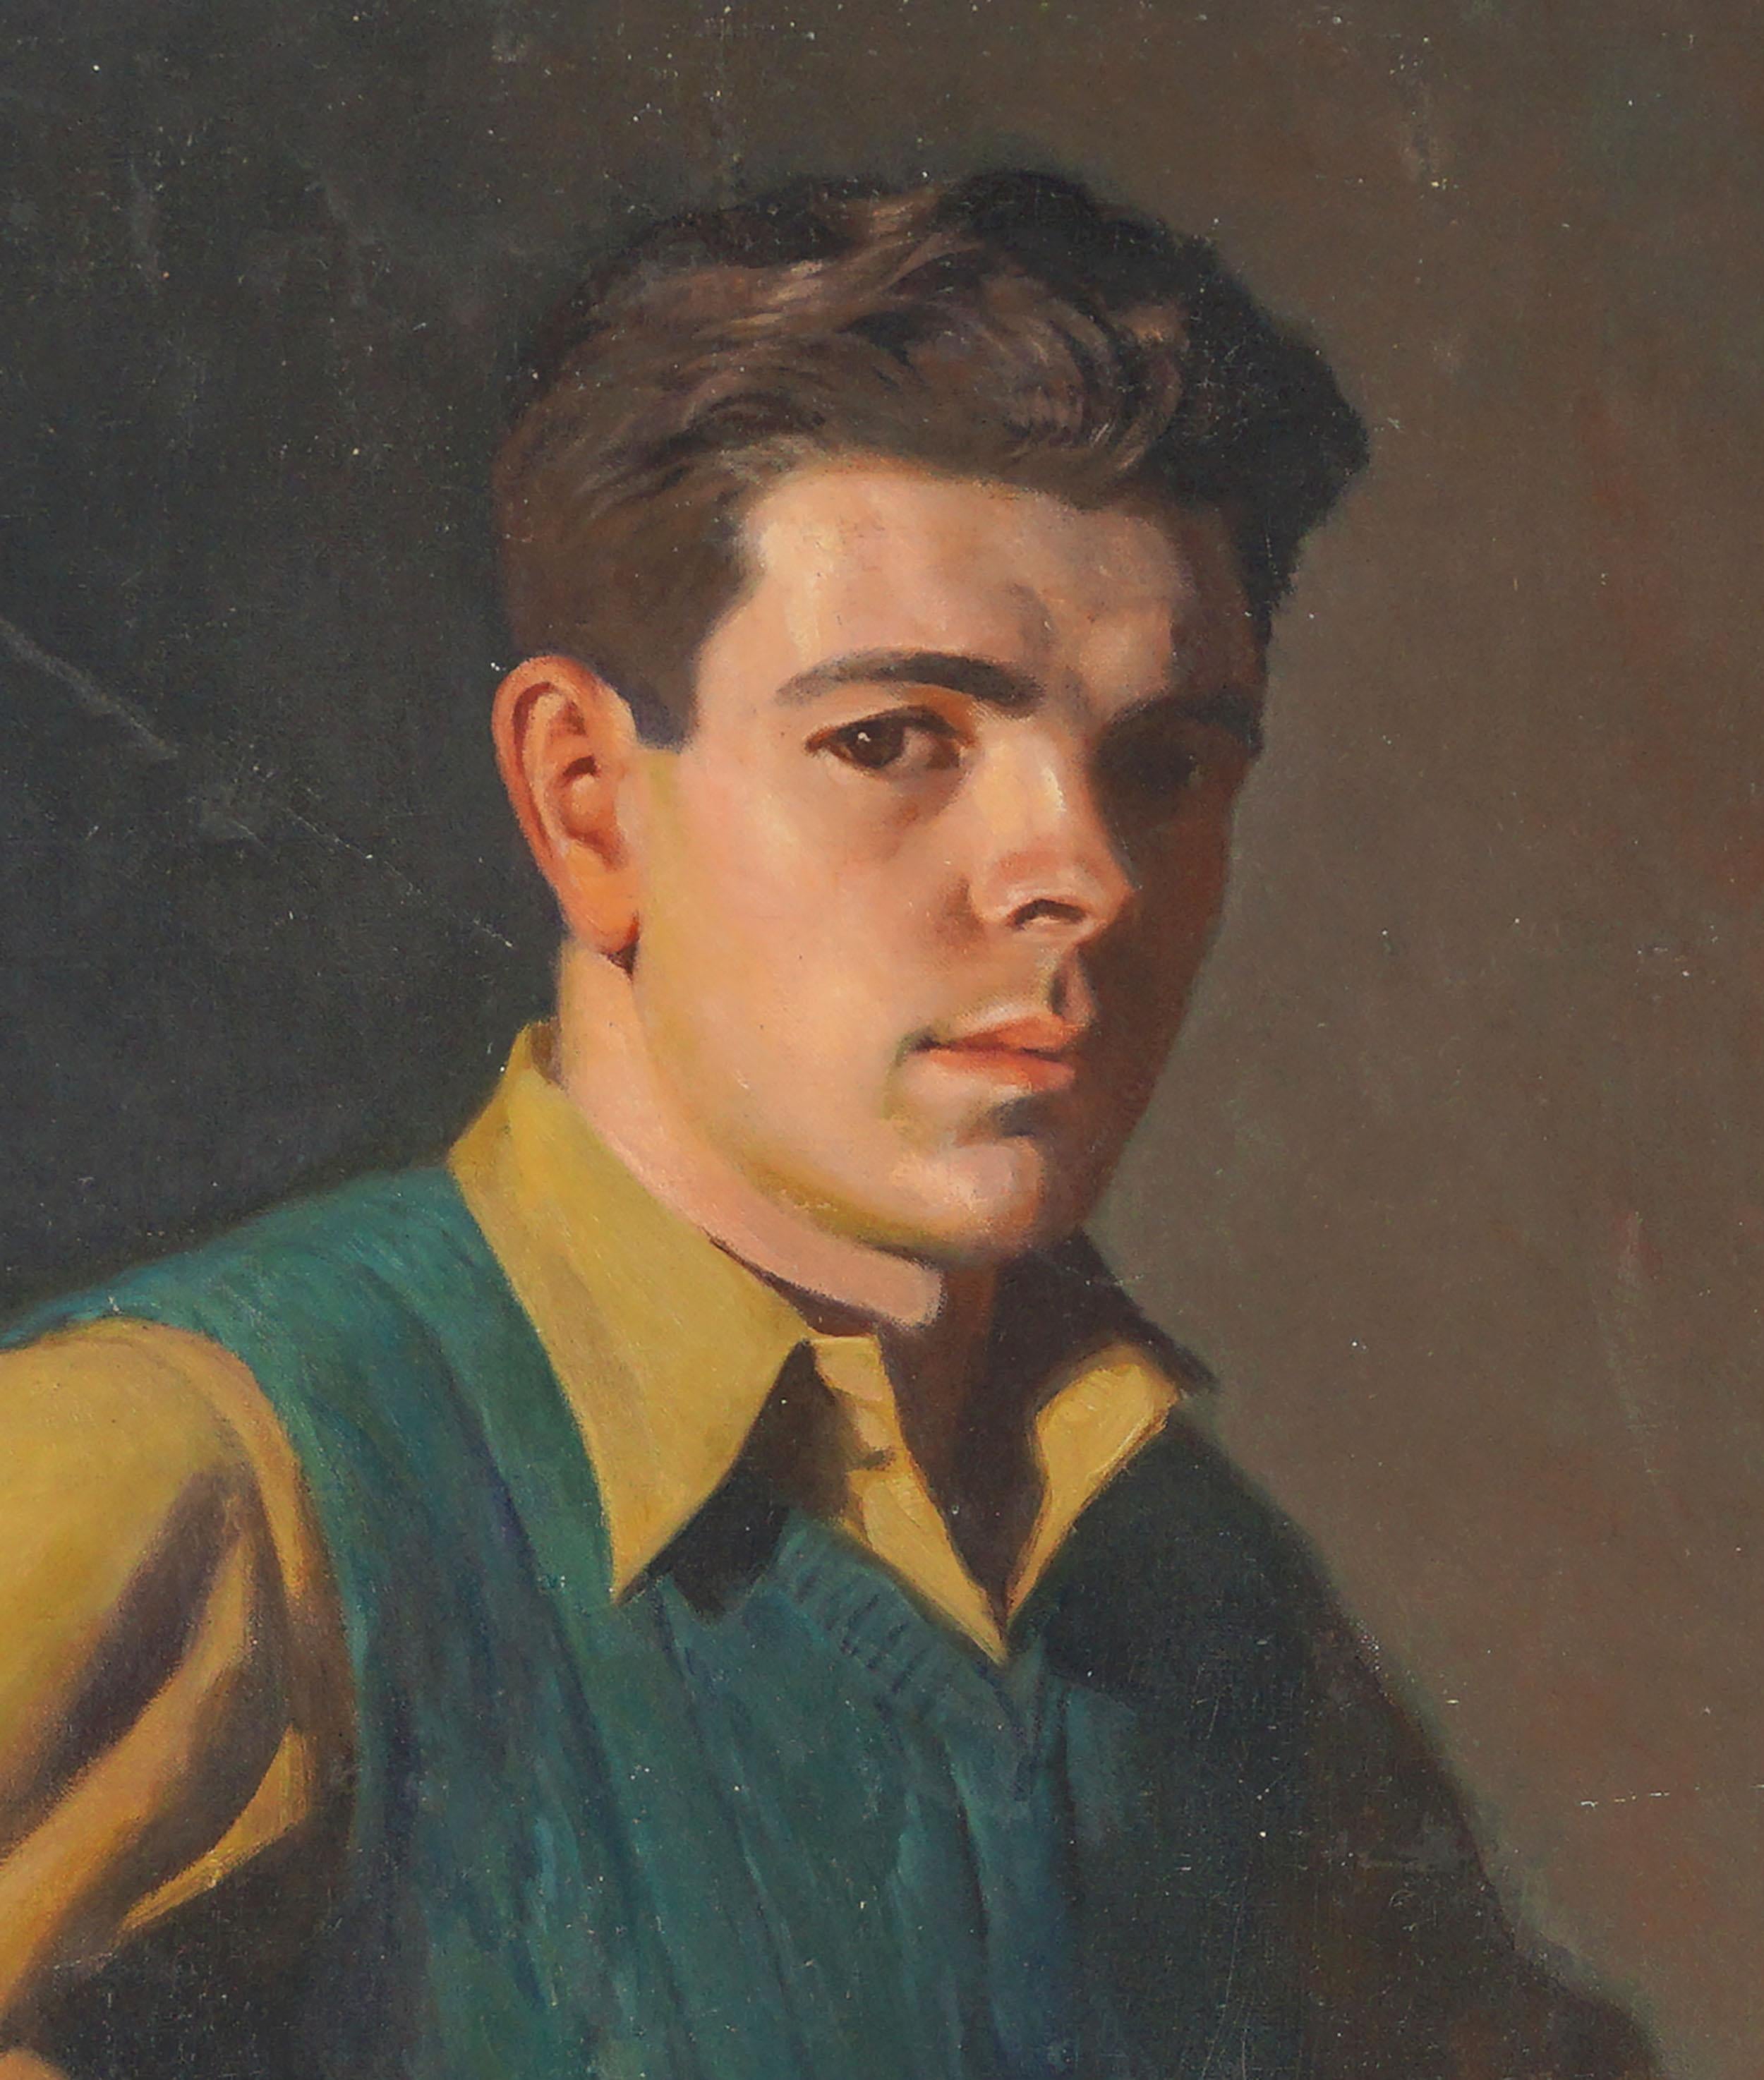 Old Hollywood -- The Young Artist's Portrait - Painting by Charles Kinghan